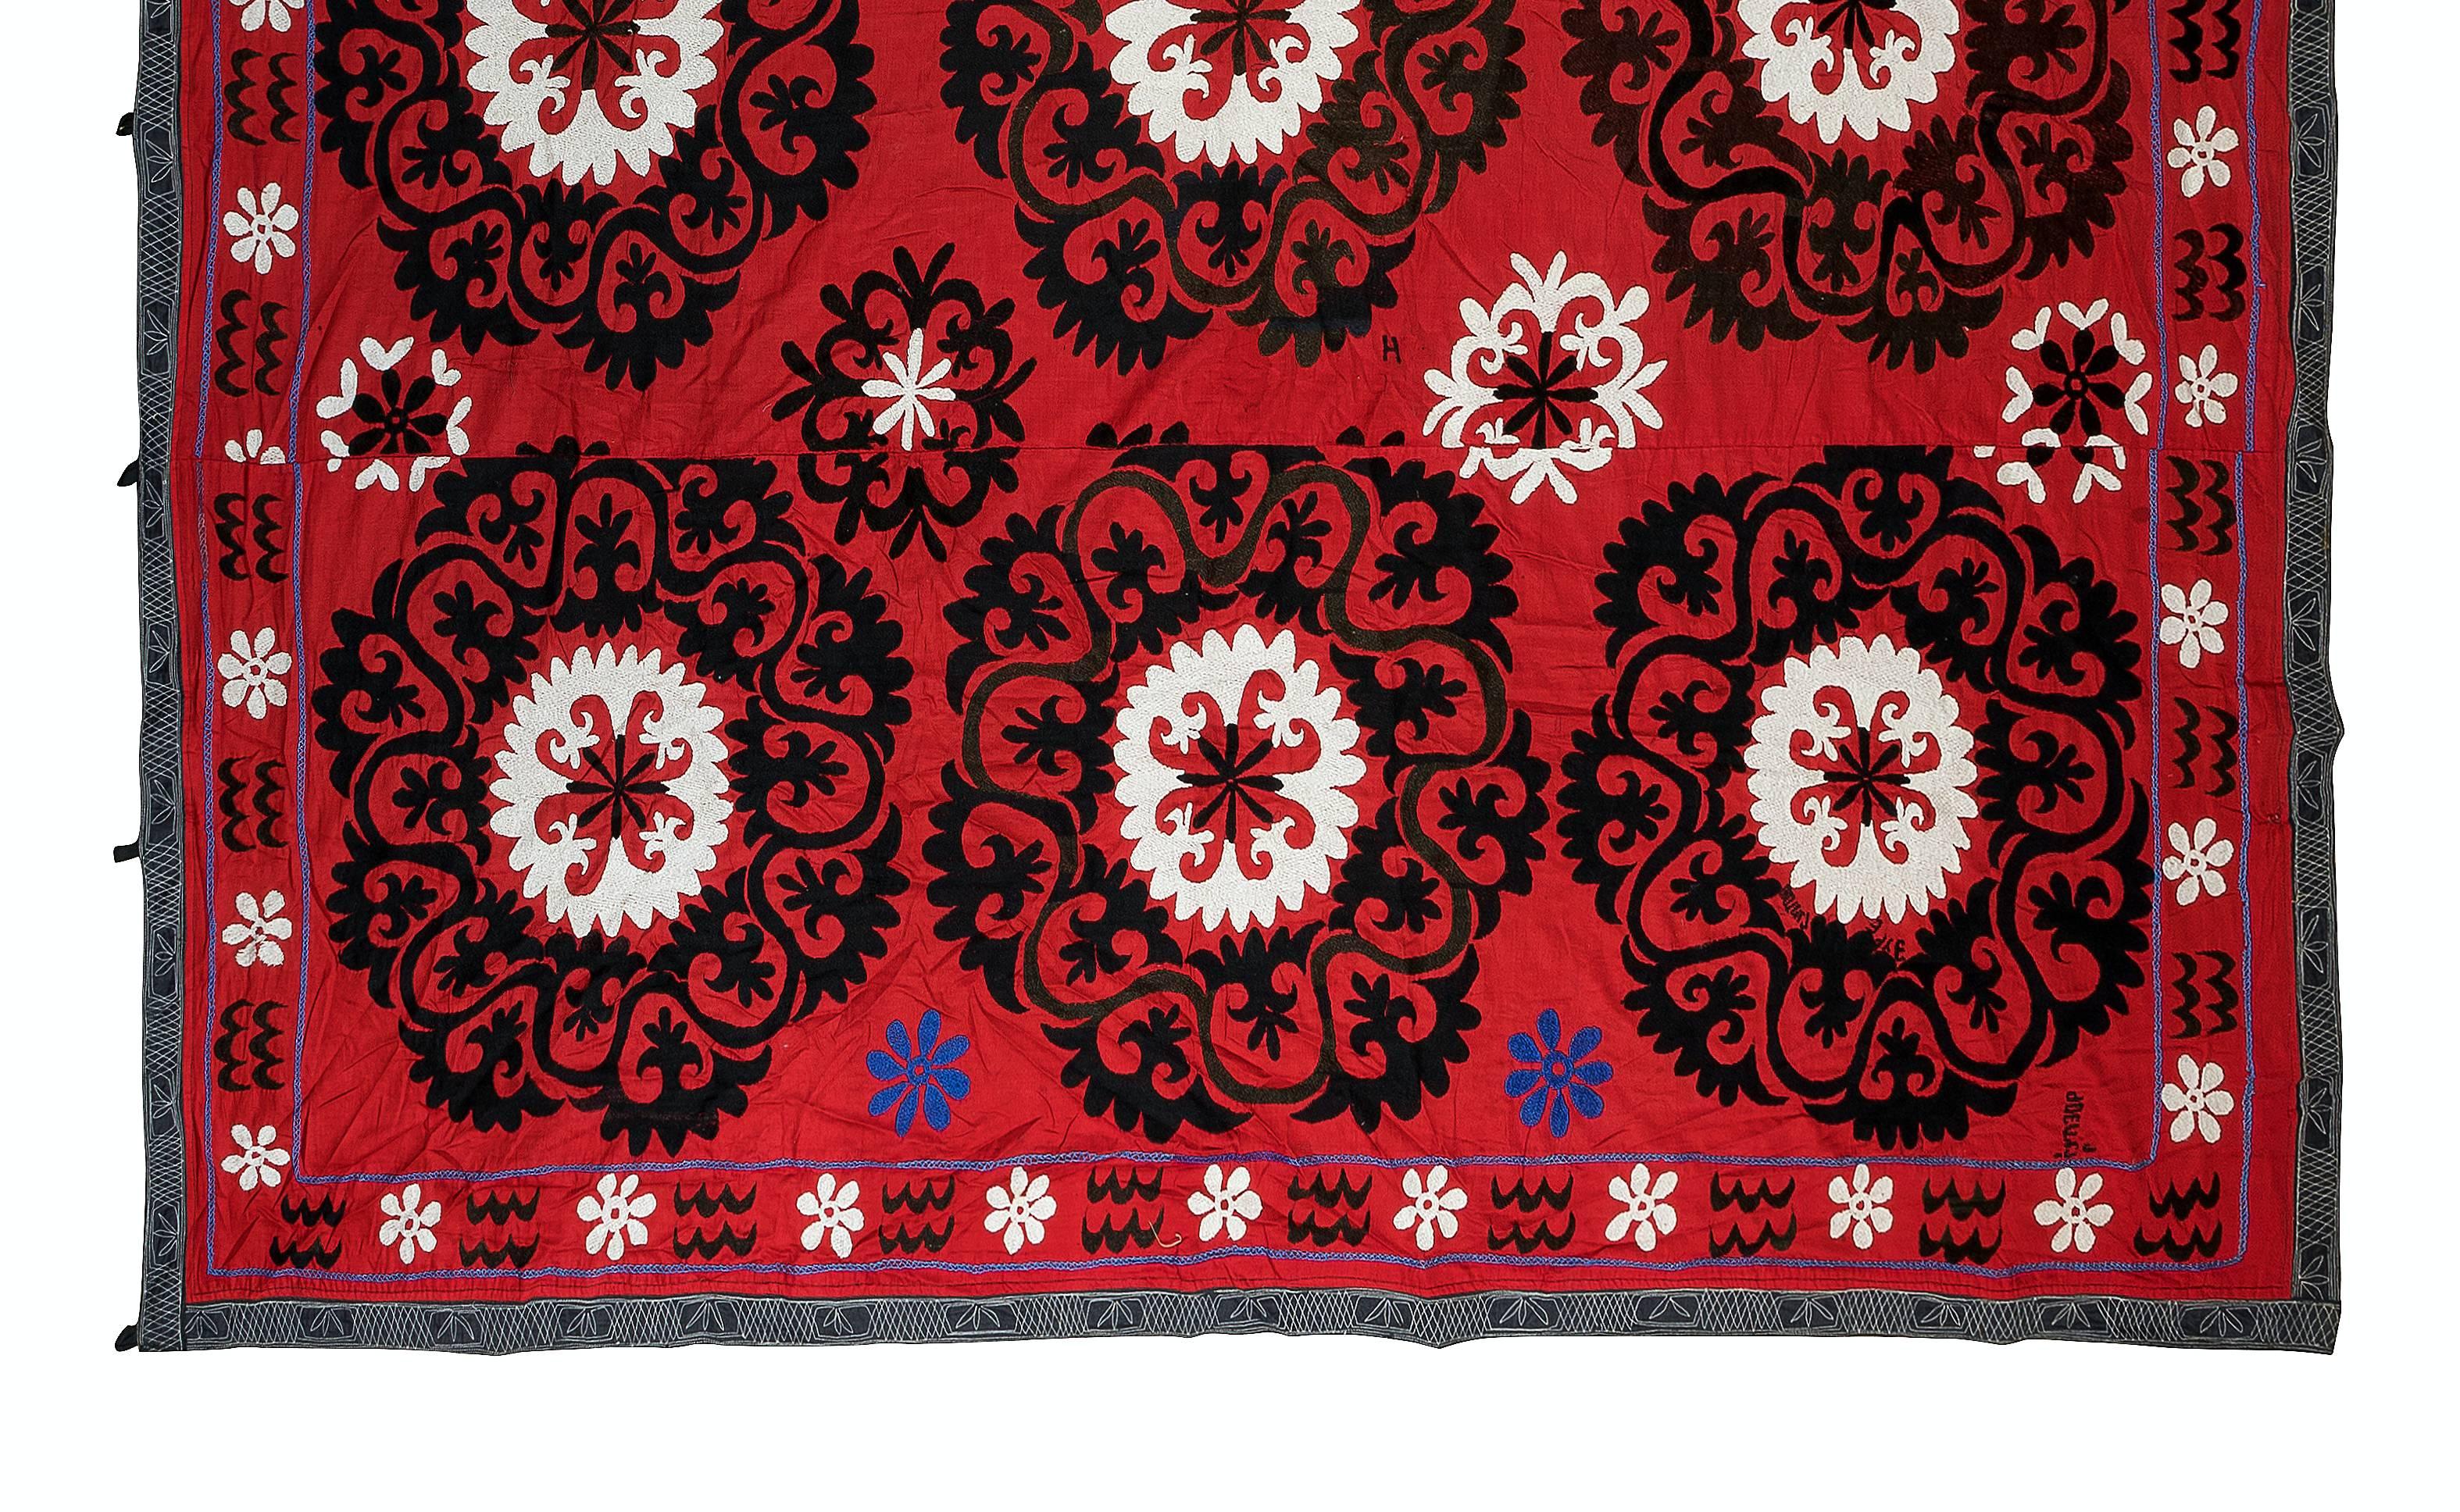 Embroidered Vintage Silk Embroidery Bed Cover, Uzbek Suzani Wall Hanging in Red For Sale